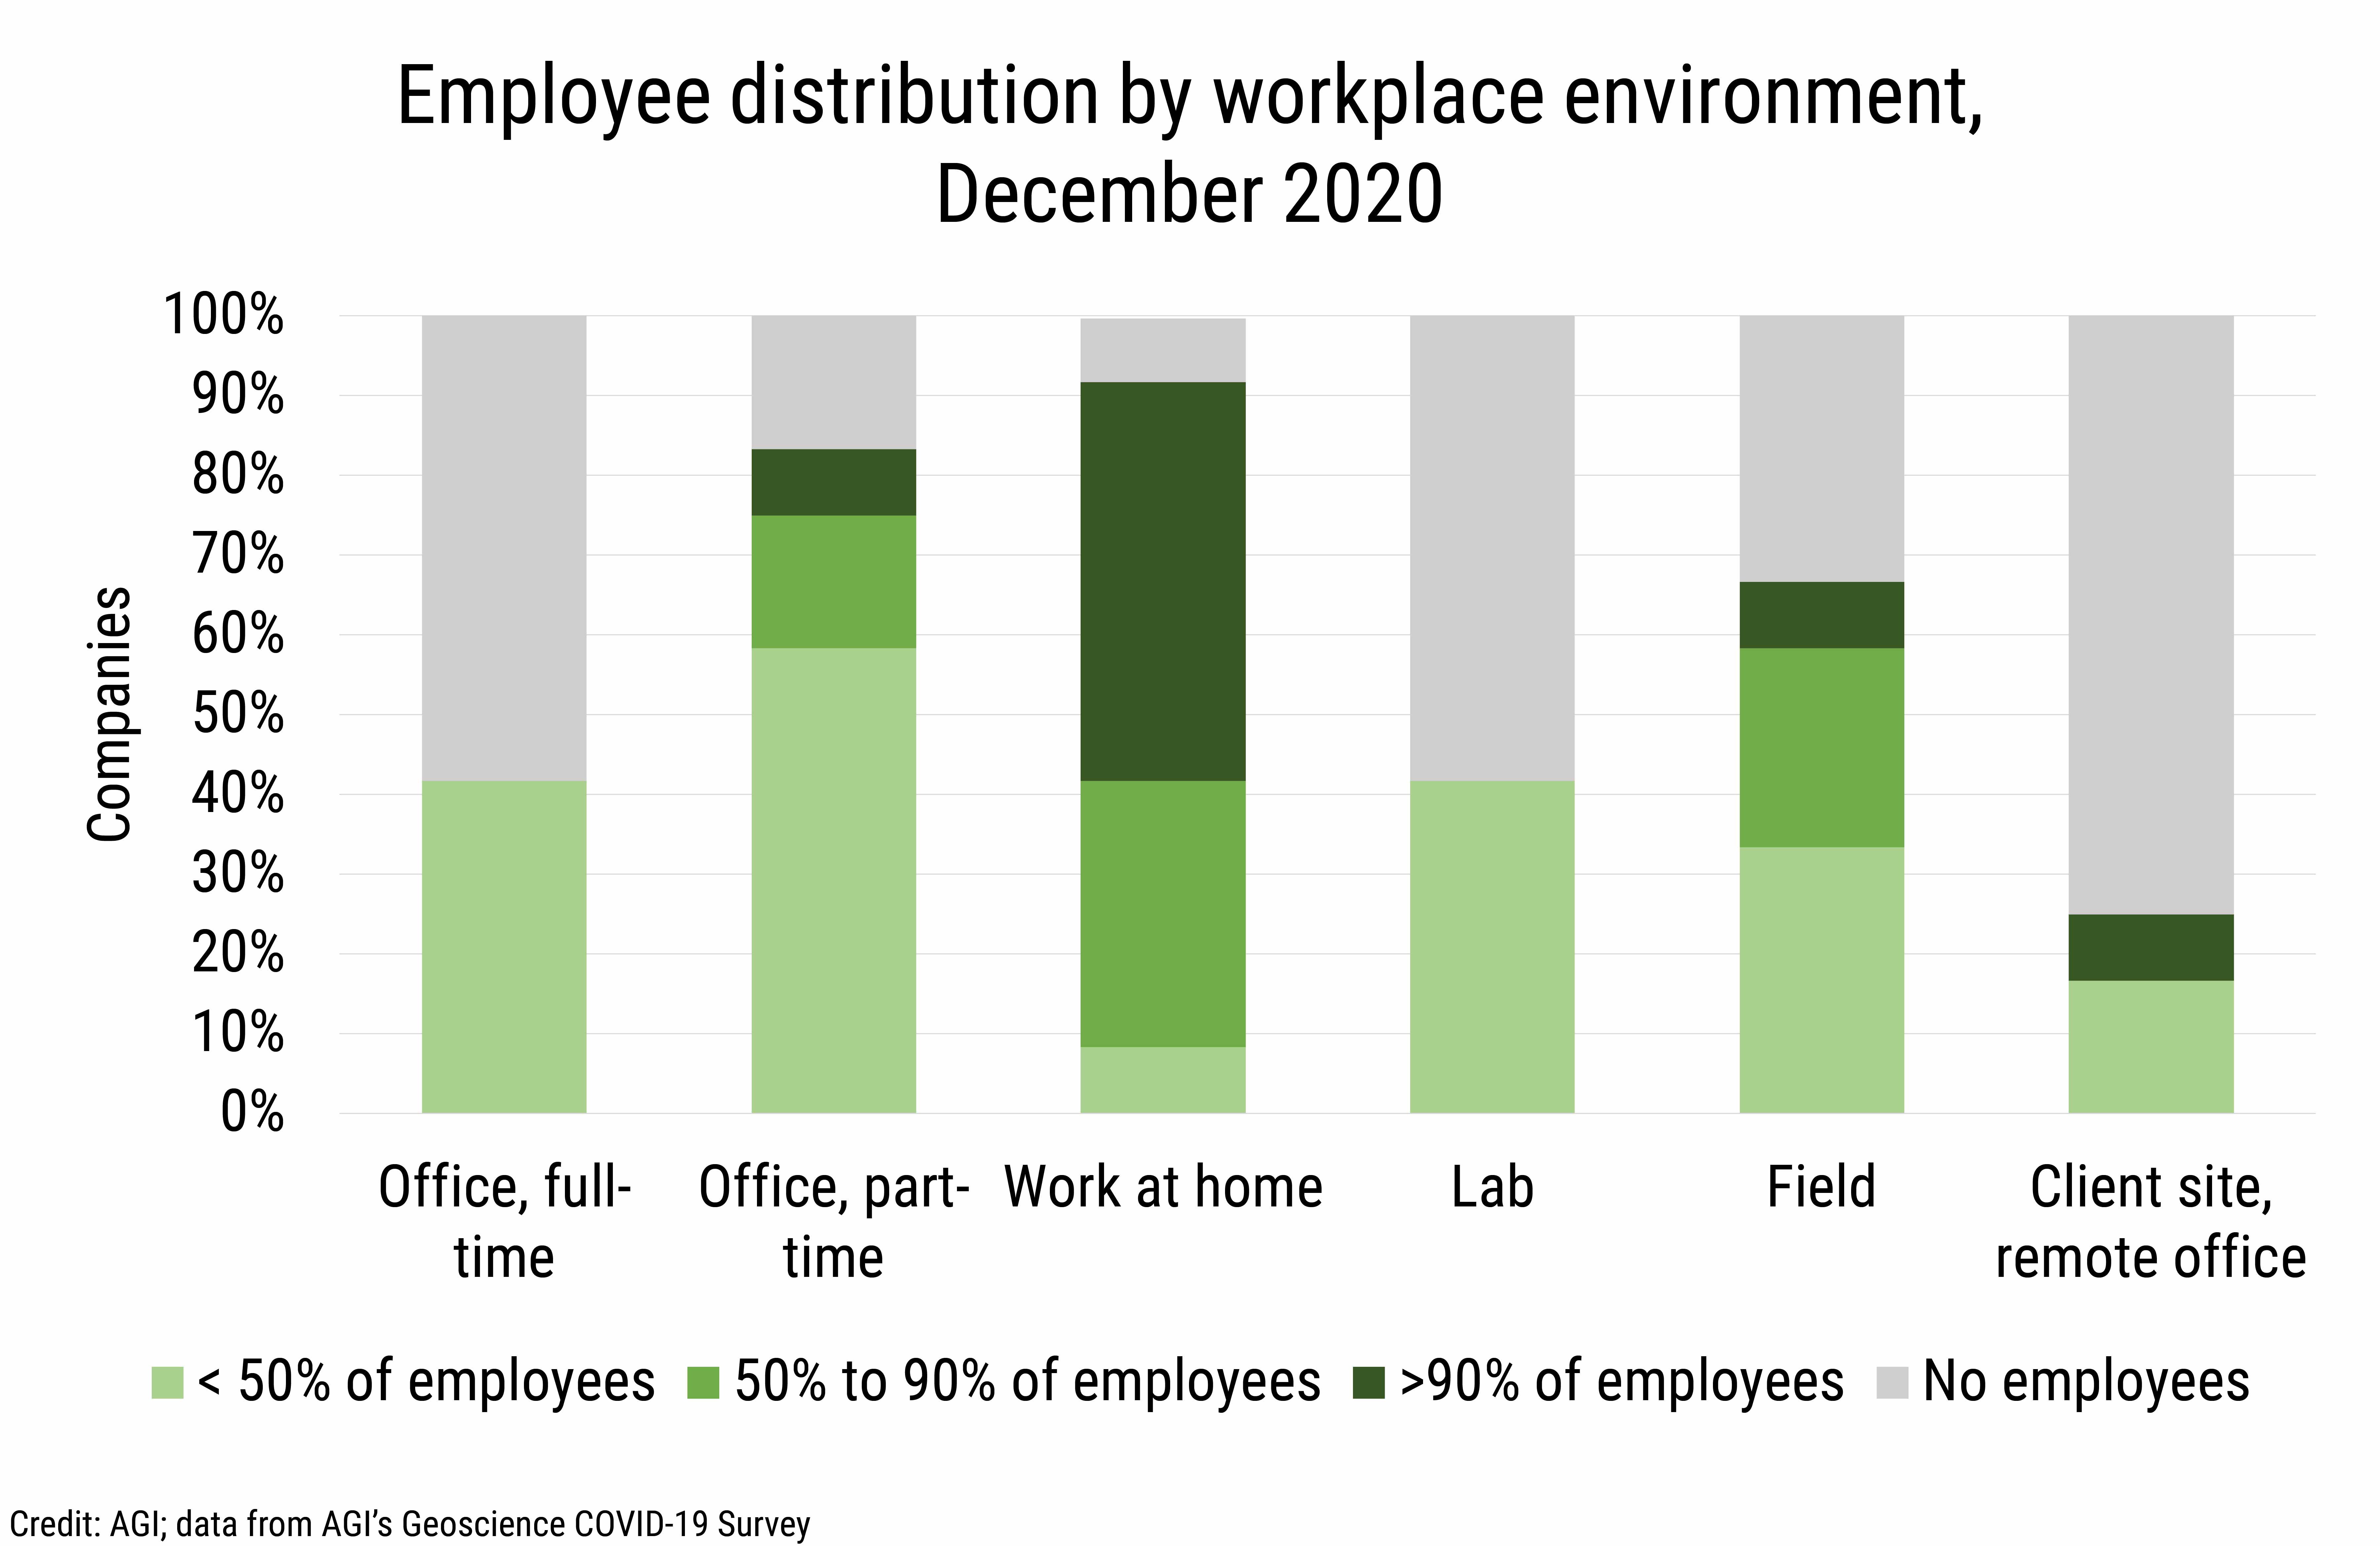 DB_2021-005_chart06: Employee distribution by workplace environment, December 2020 (Credit: AGI; data from AGI's Geoscience COVID-19 Survey)